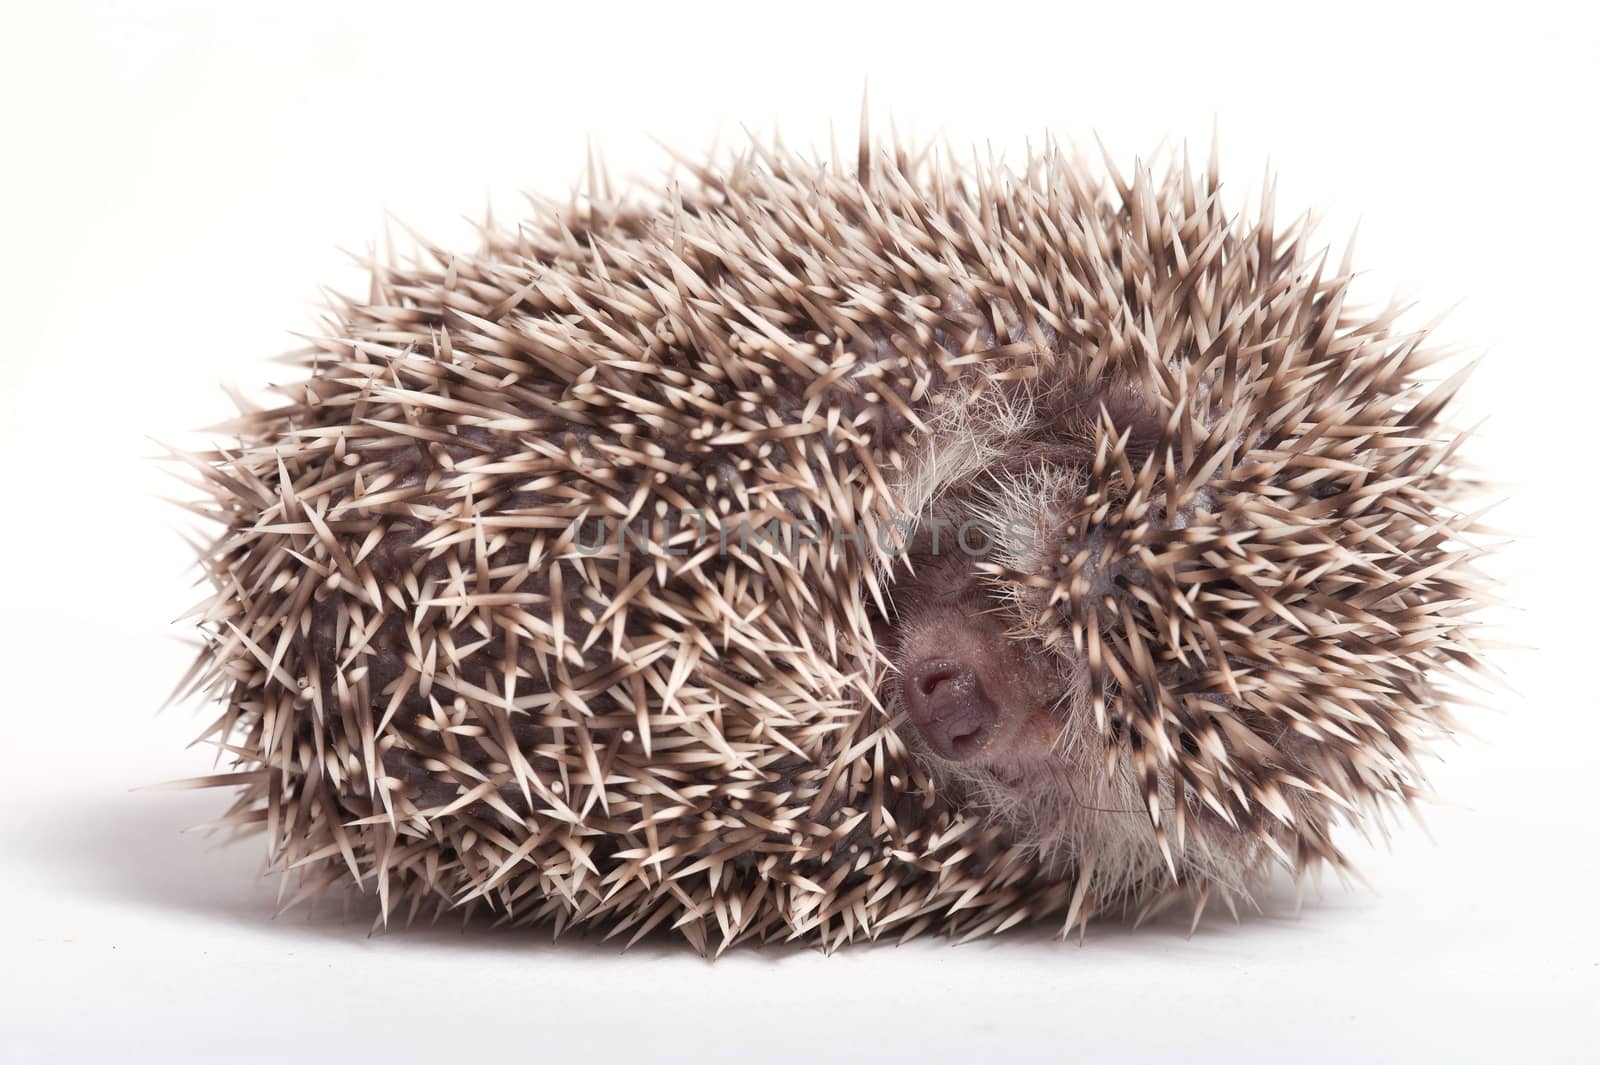 Hedgehog sleeping isolate on white background by think4photop